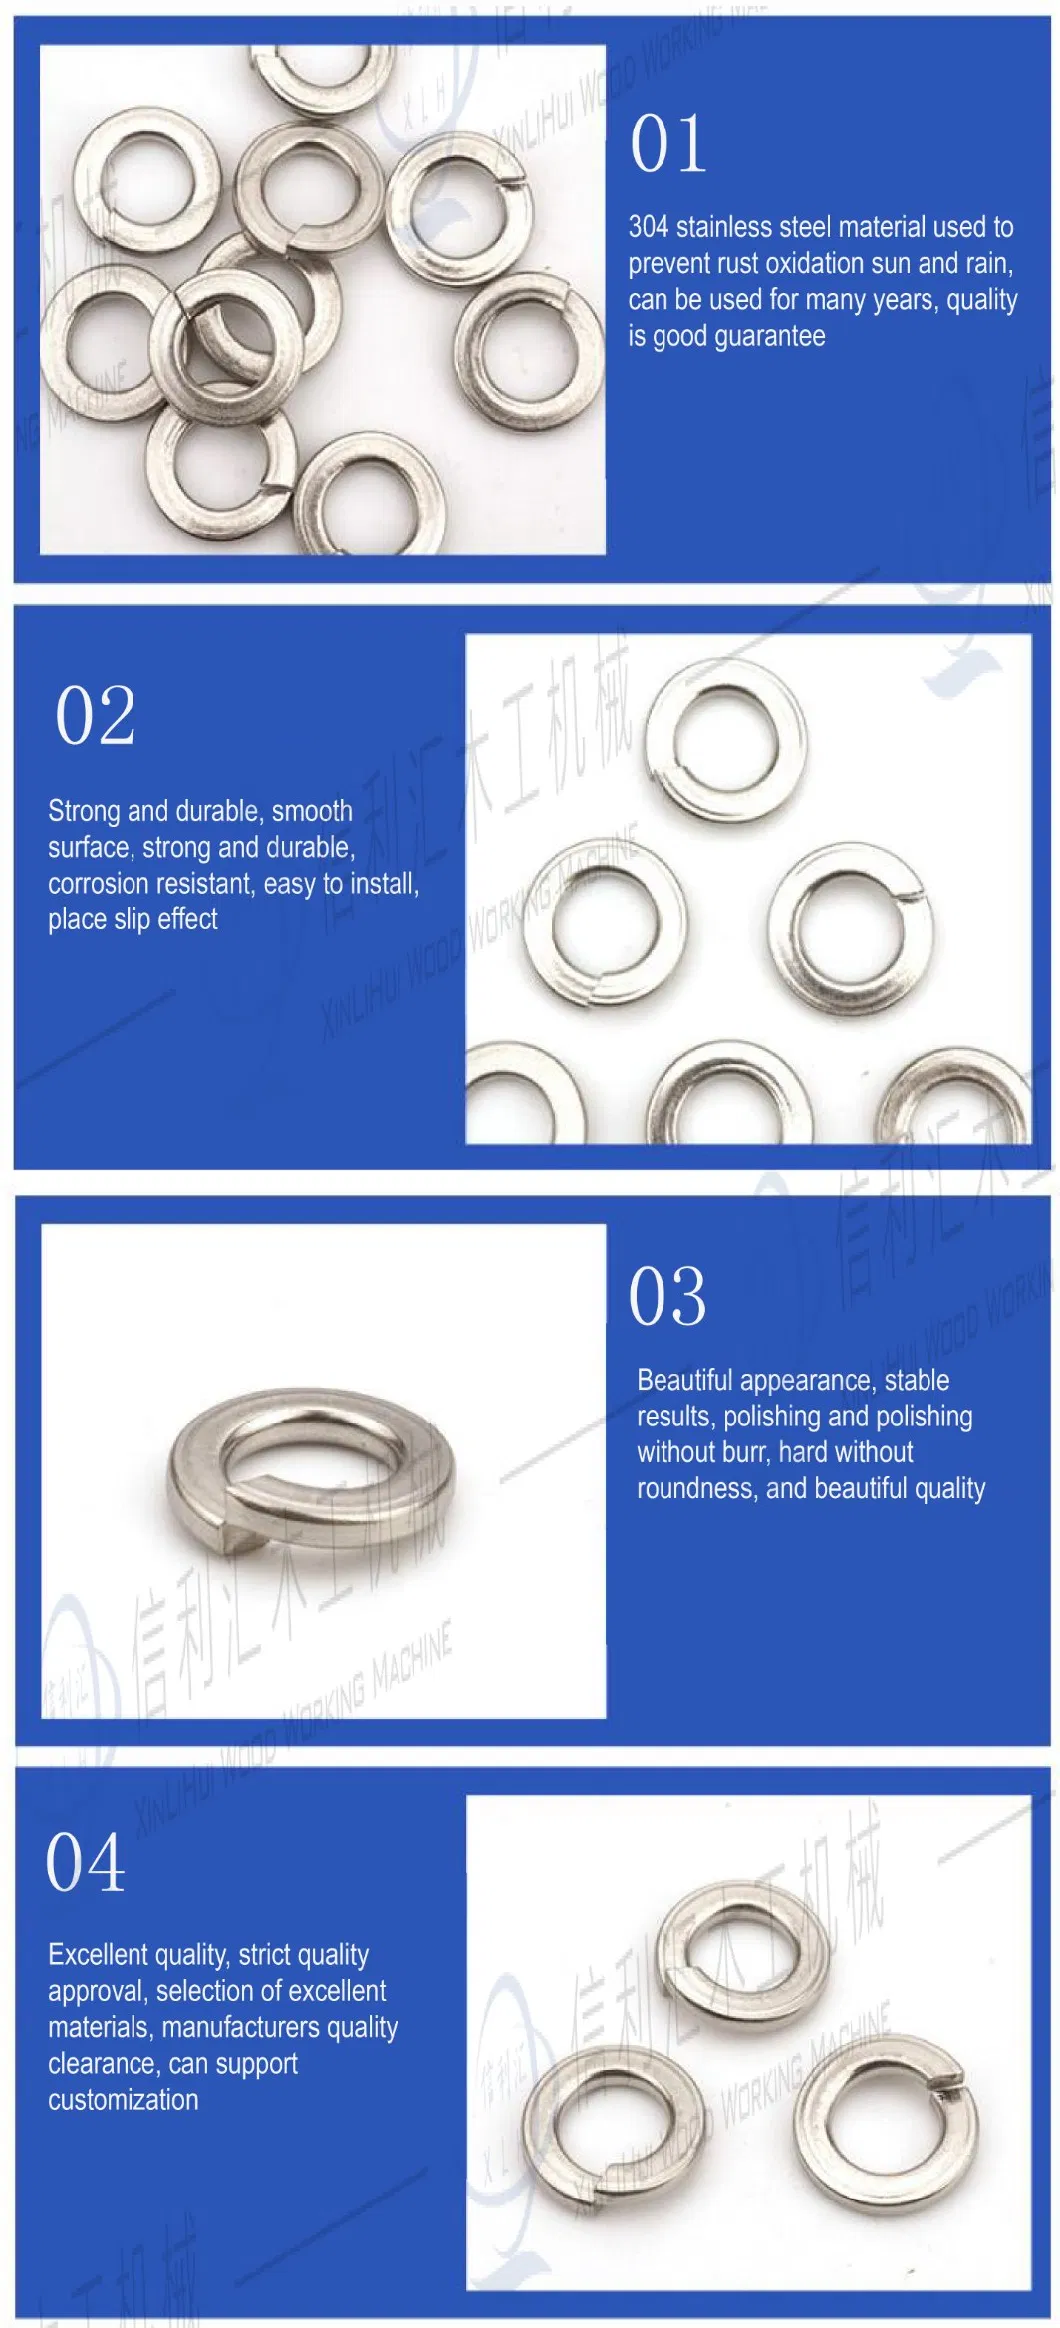 DIN Black Oxide Spring Washer Customized Black Rubber Washer, Rubber Elastic Ring, Coupling Cushion for Shock Absorption, Transmission Ring Gasket